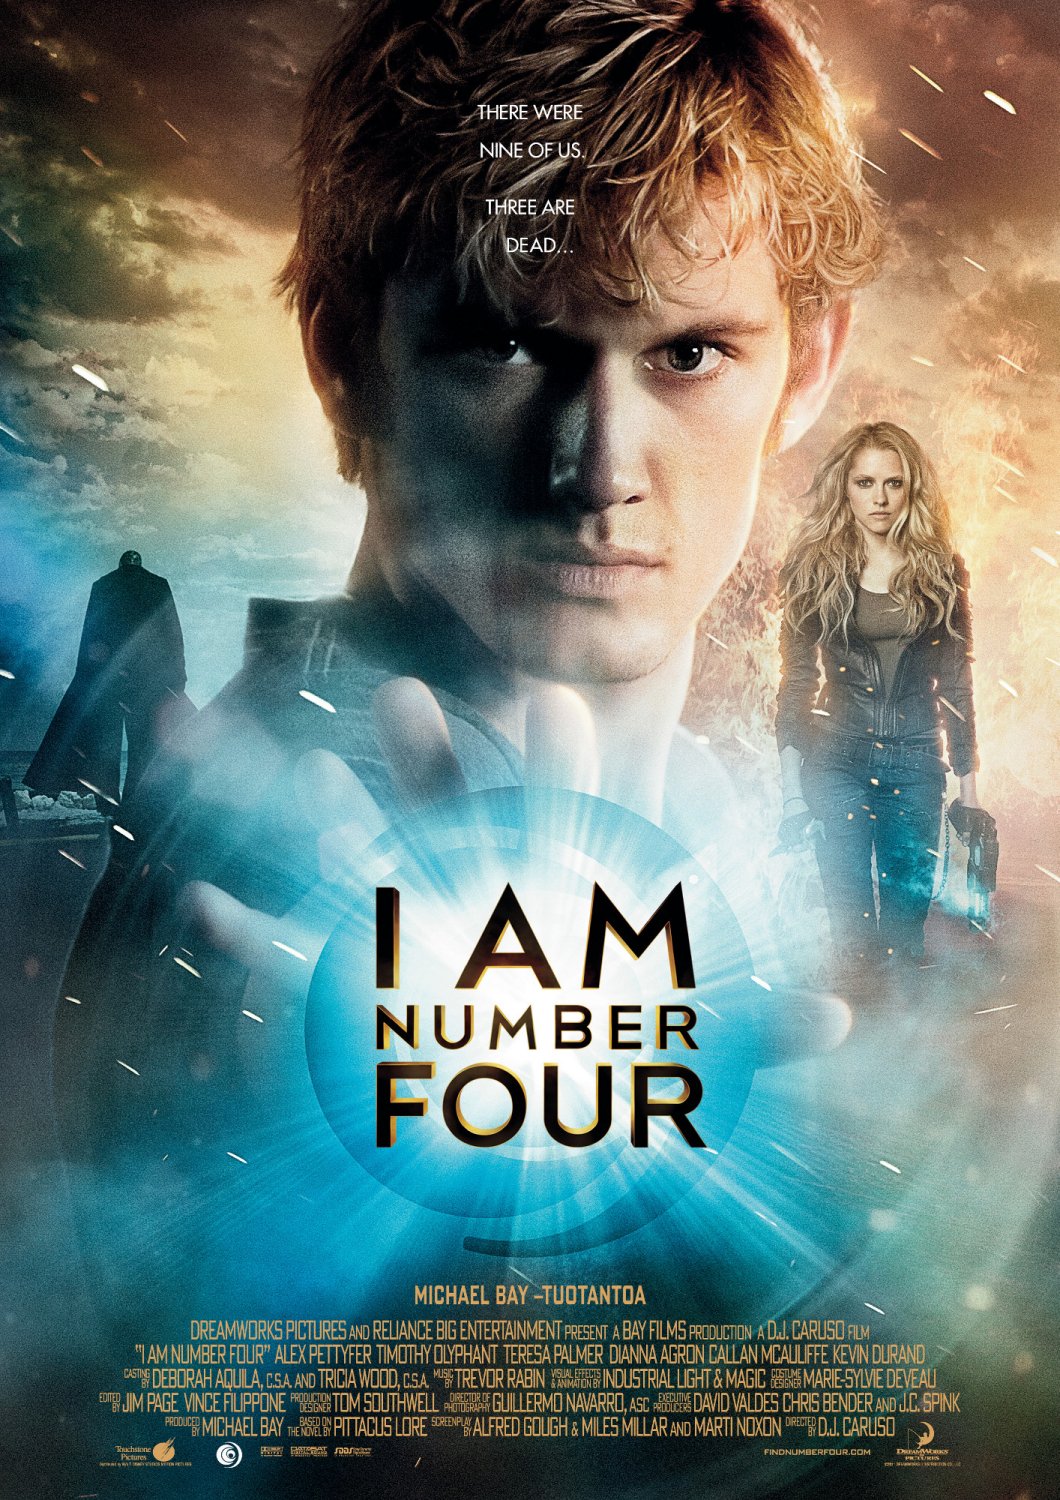 I Am Number Four Trailer 2 HD - YouTube